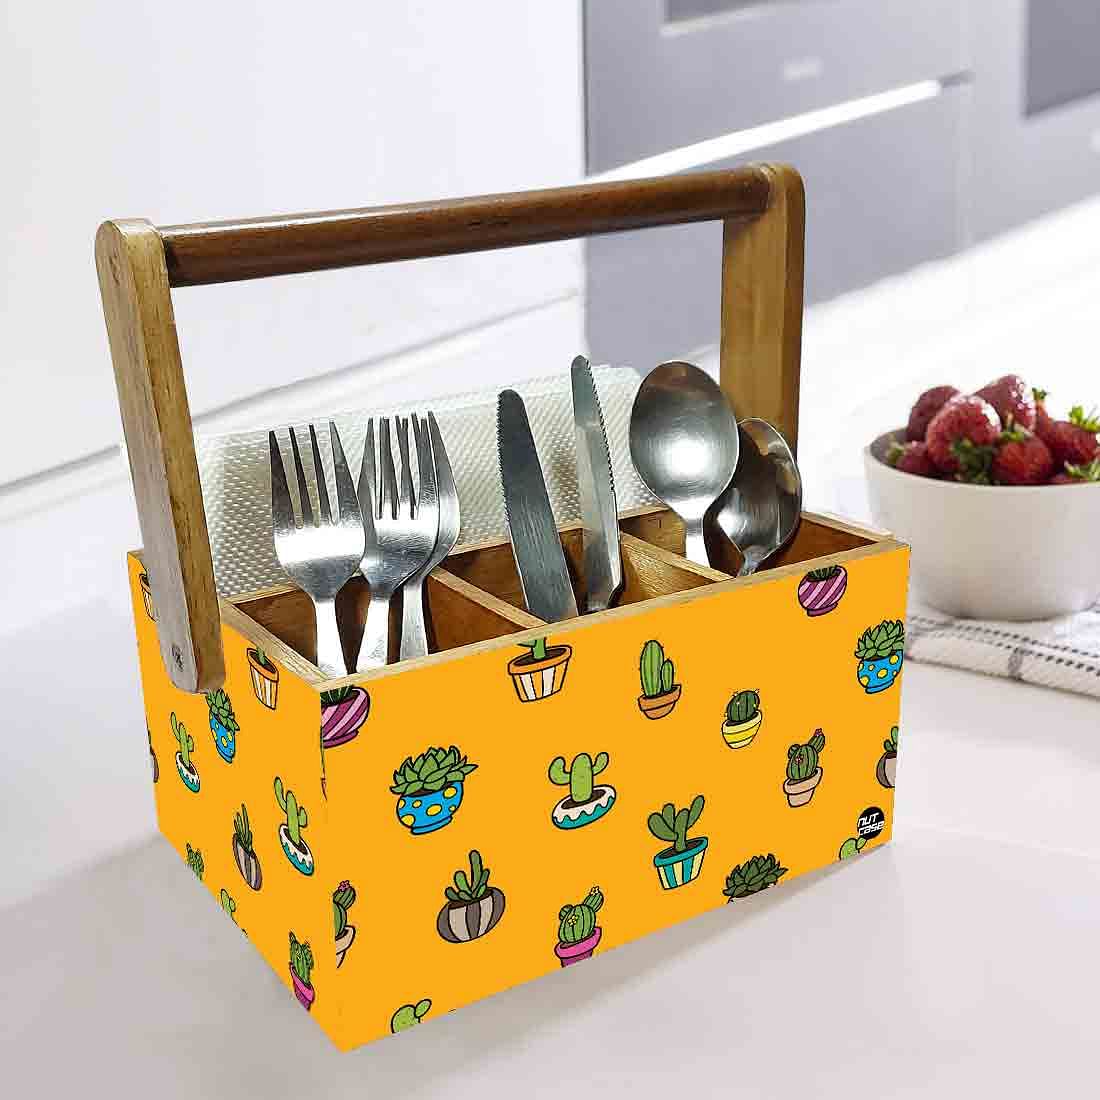 Condiment Cutlery Tissue Holder With Handle for Kitchen Organizer - Cactus Pots Nutcase